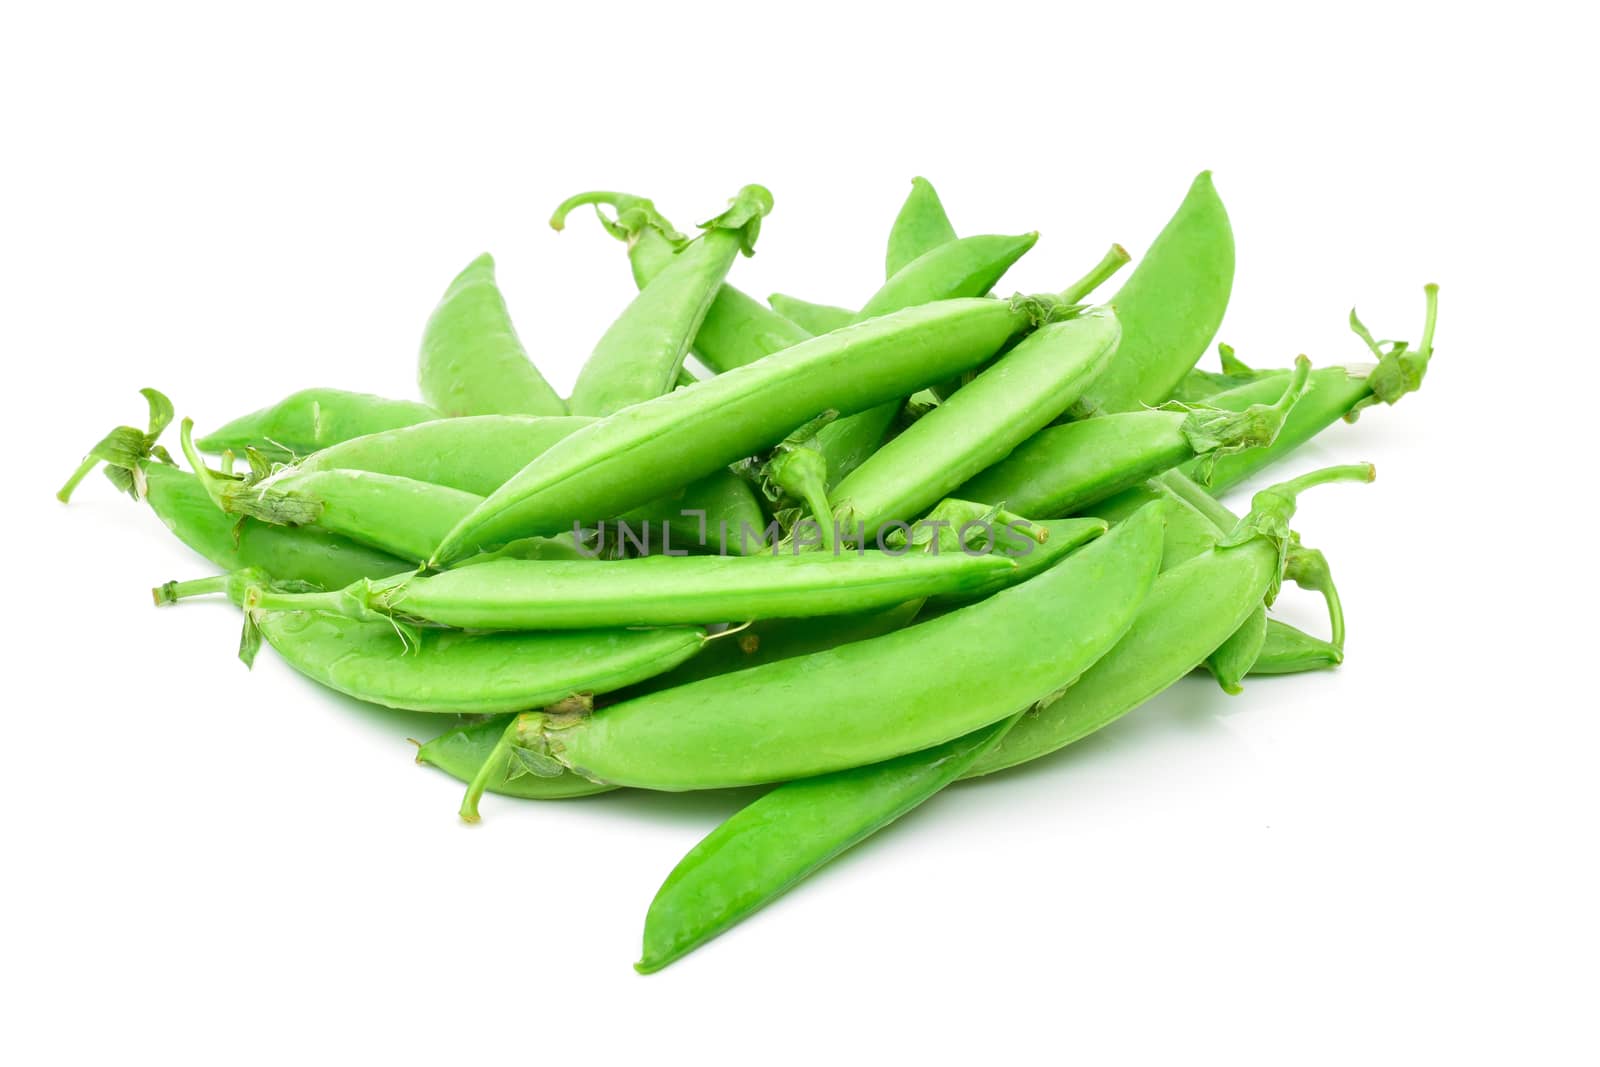 Peas grains on a white background by sompongtom